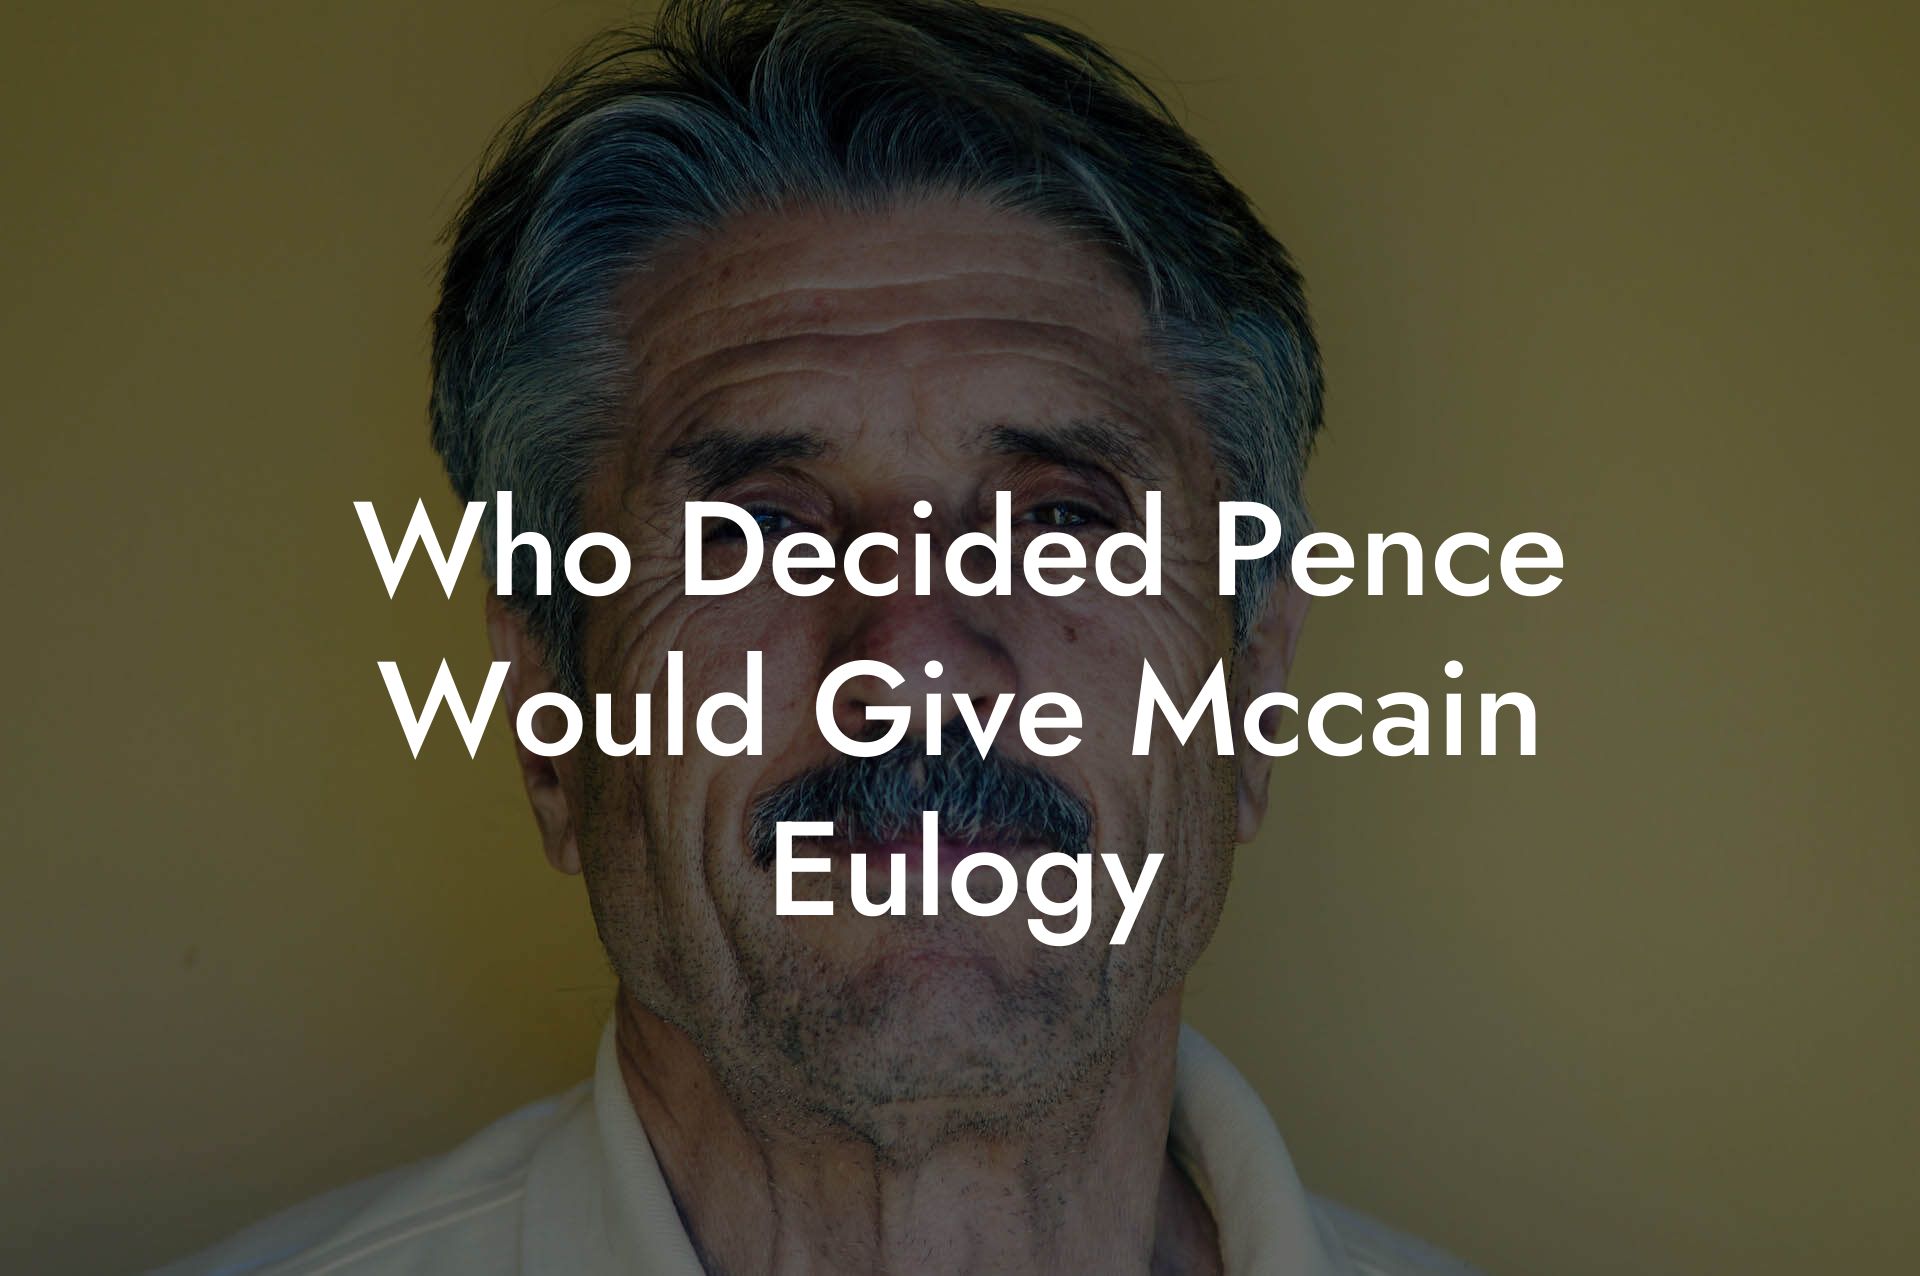 Who Decided Pence Would Give Mccain Eulogy